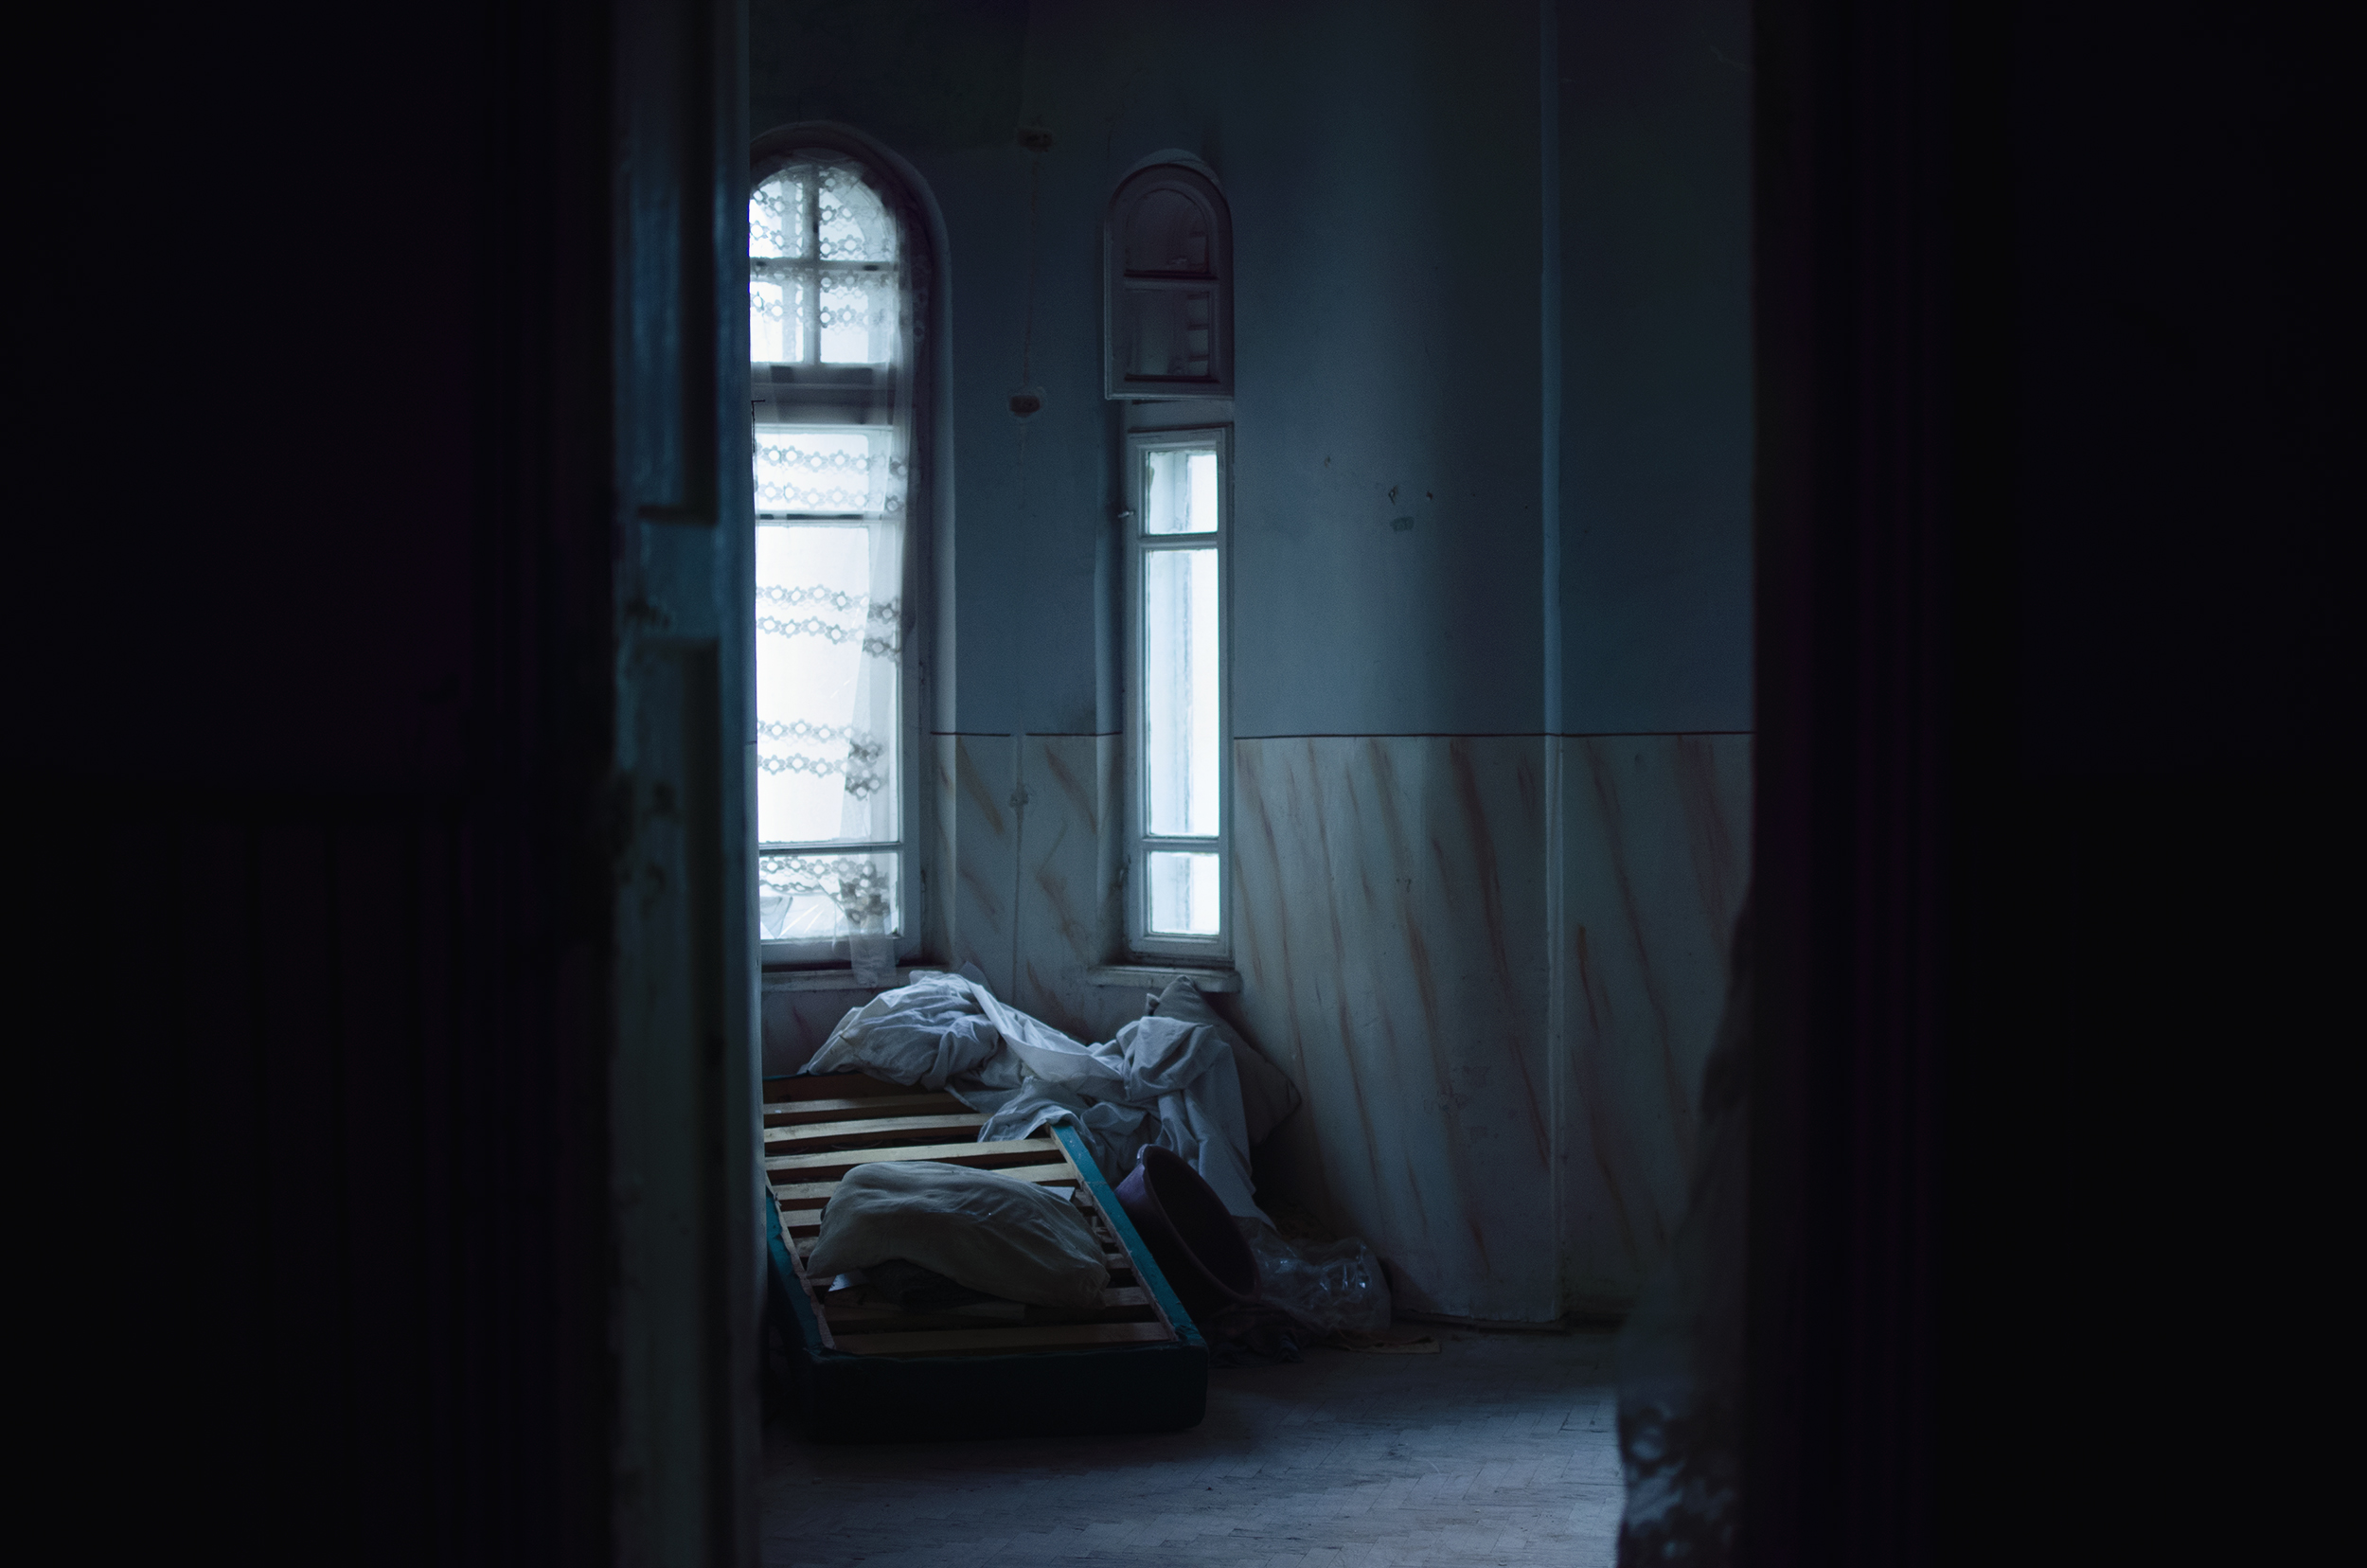 Wallpaper, landscape, window, dark, night, architecture, creepy, horror, urban, room, abandoned, bed, house, blue, cold, Lost, enter, wind, door, emotion, camp, ruins, midnight, Mystery, angle, light, windows, scary, walls, darkness, asylum